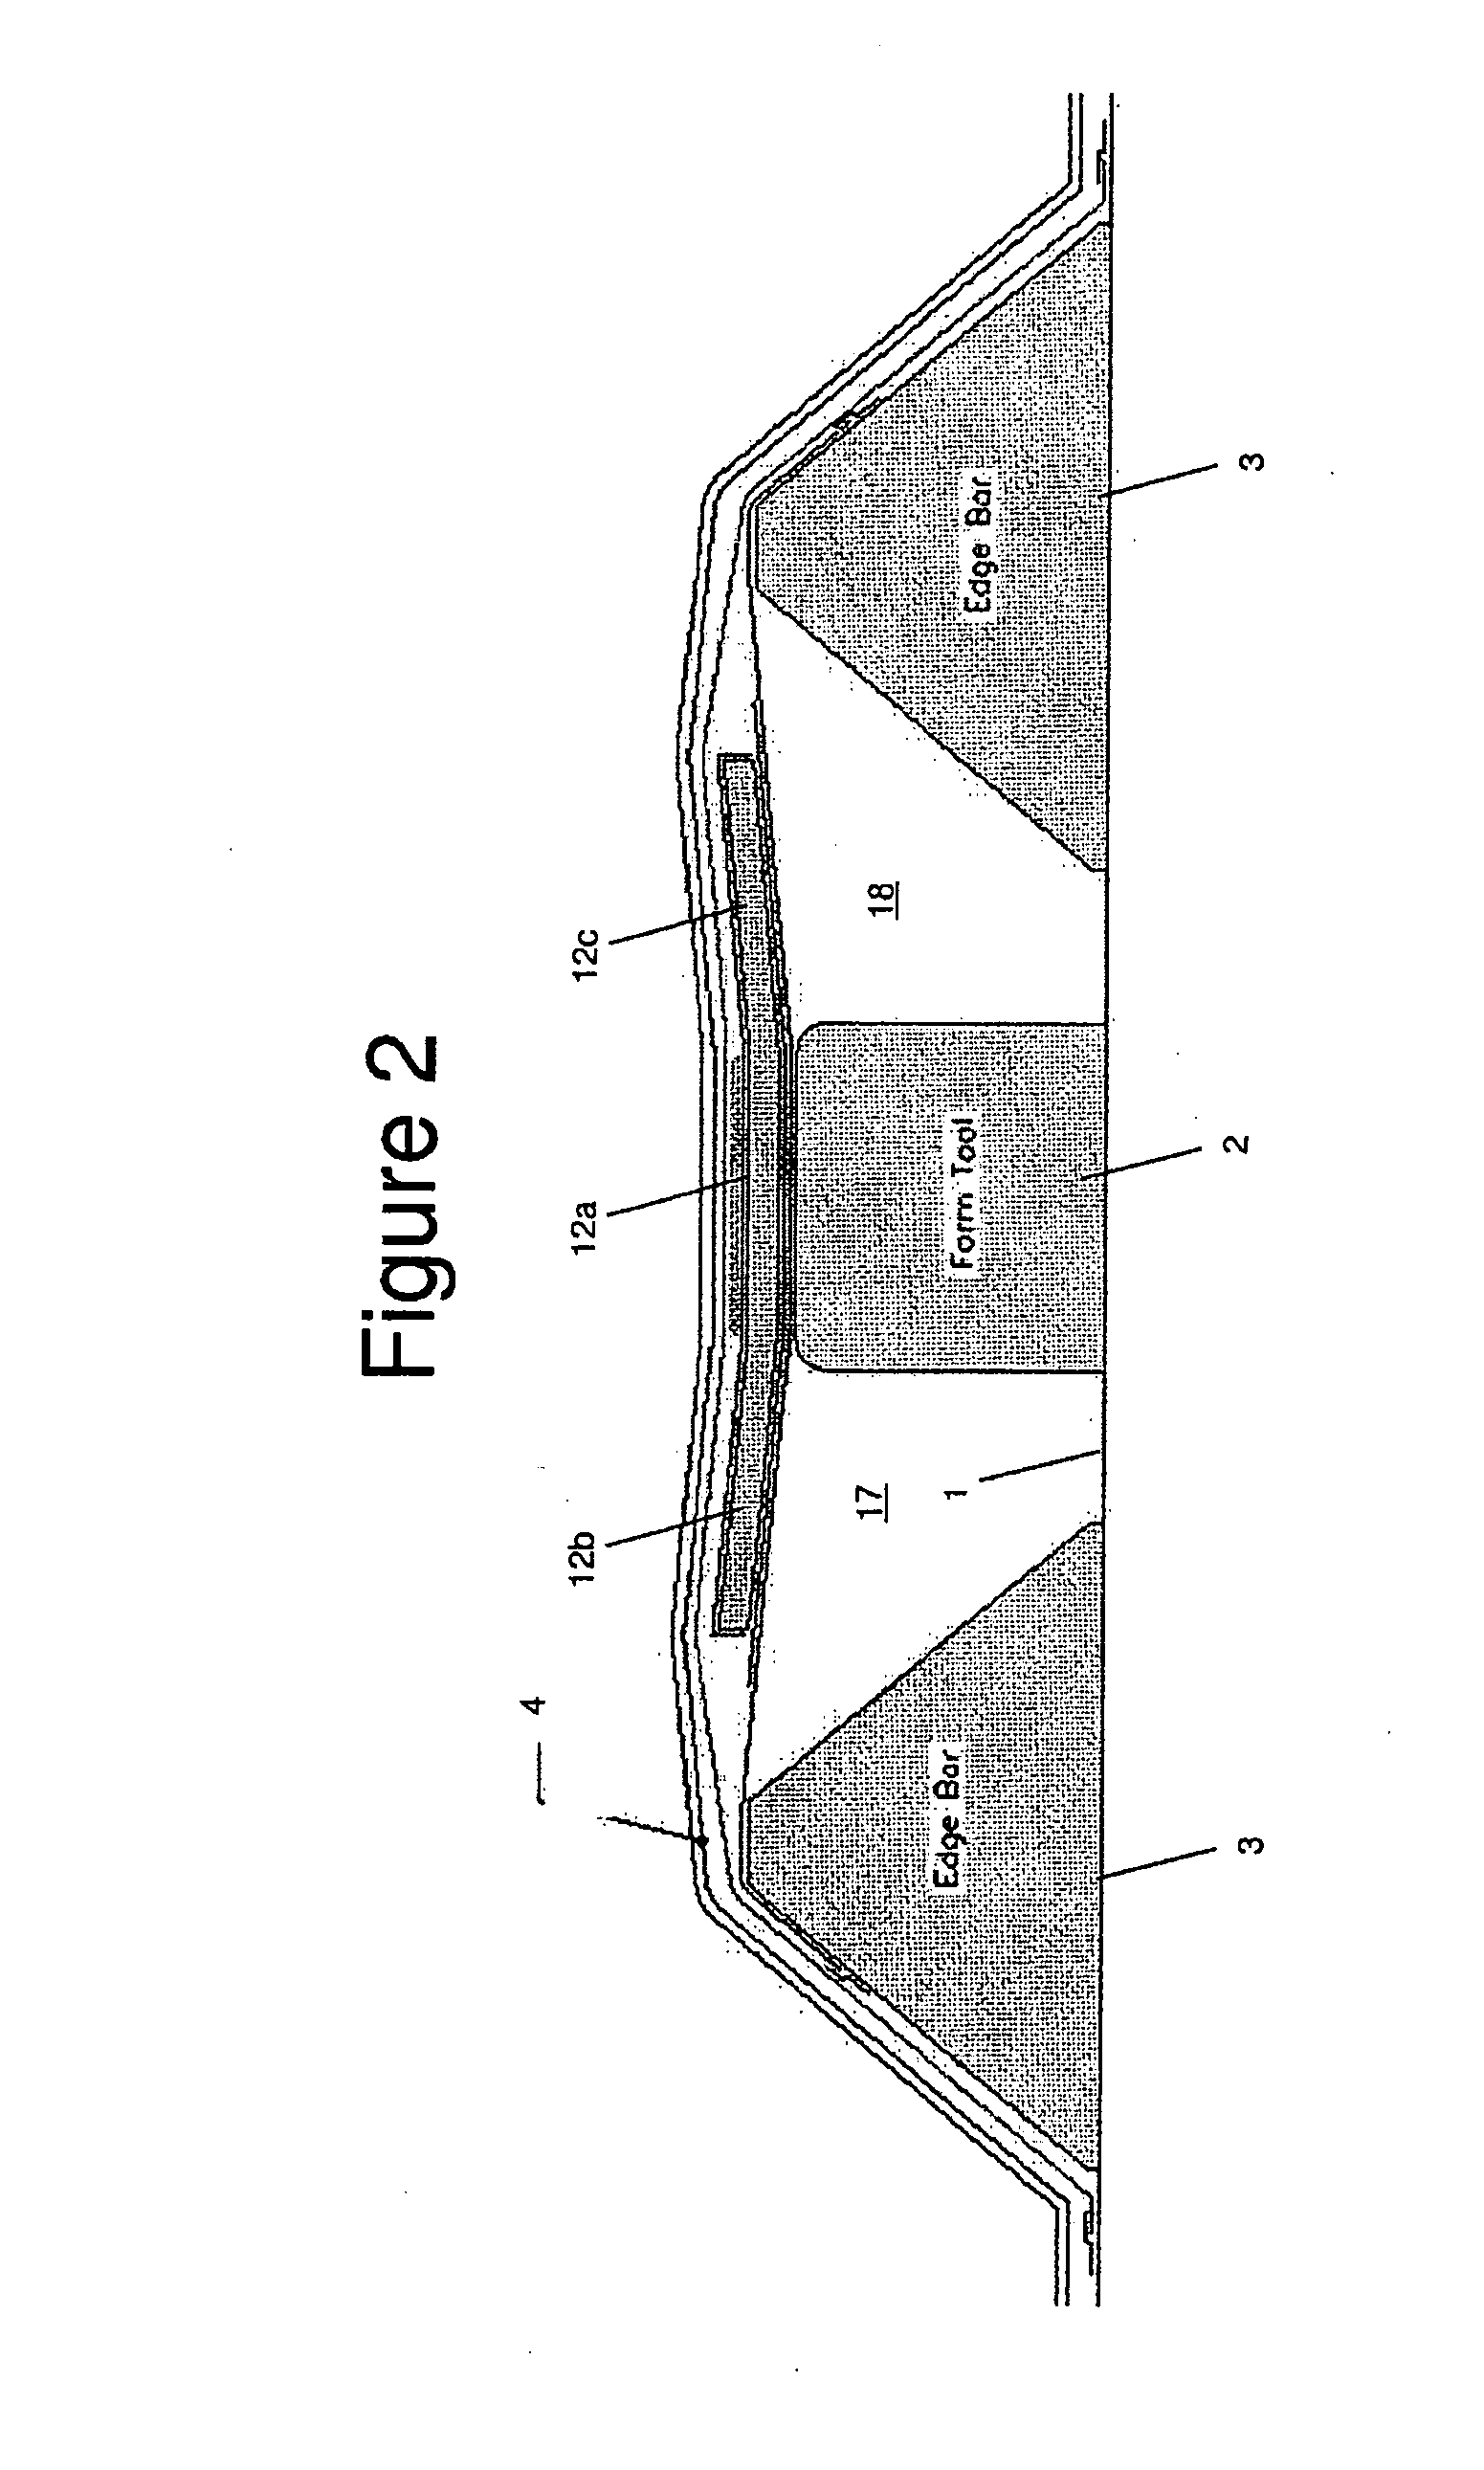 Method of monitoring the performance of a pressure intensifier